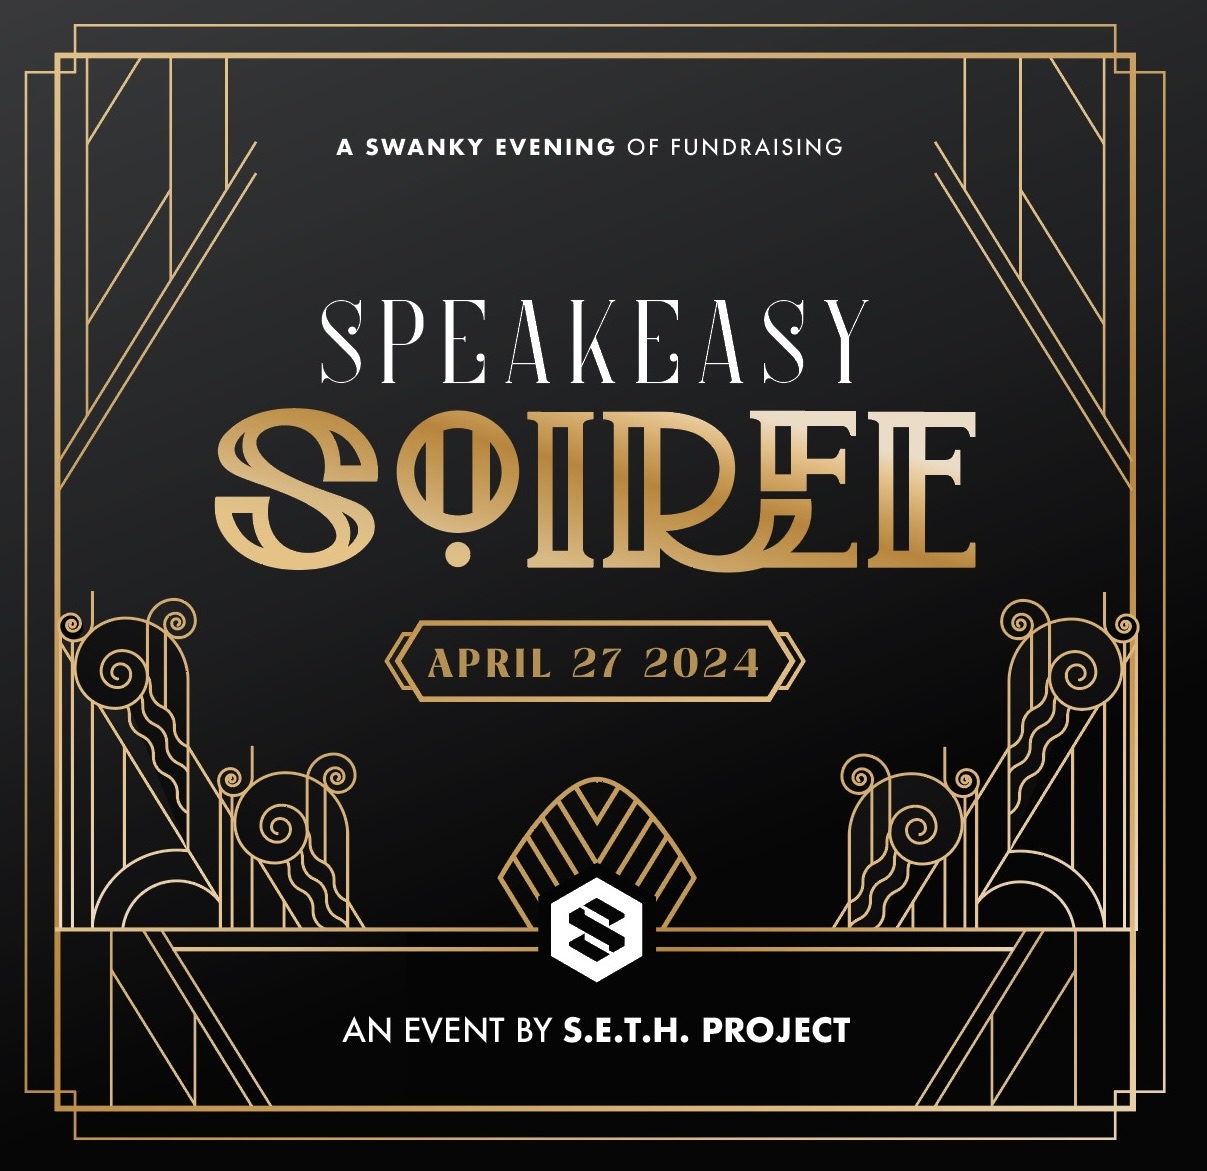 Speakeasy Soiree - A Party to #EndALS